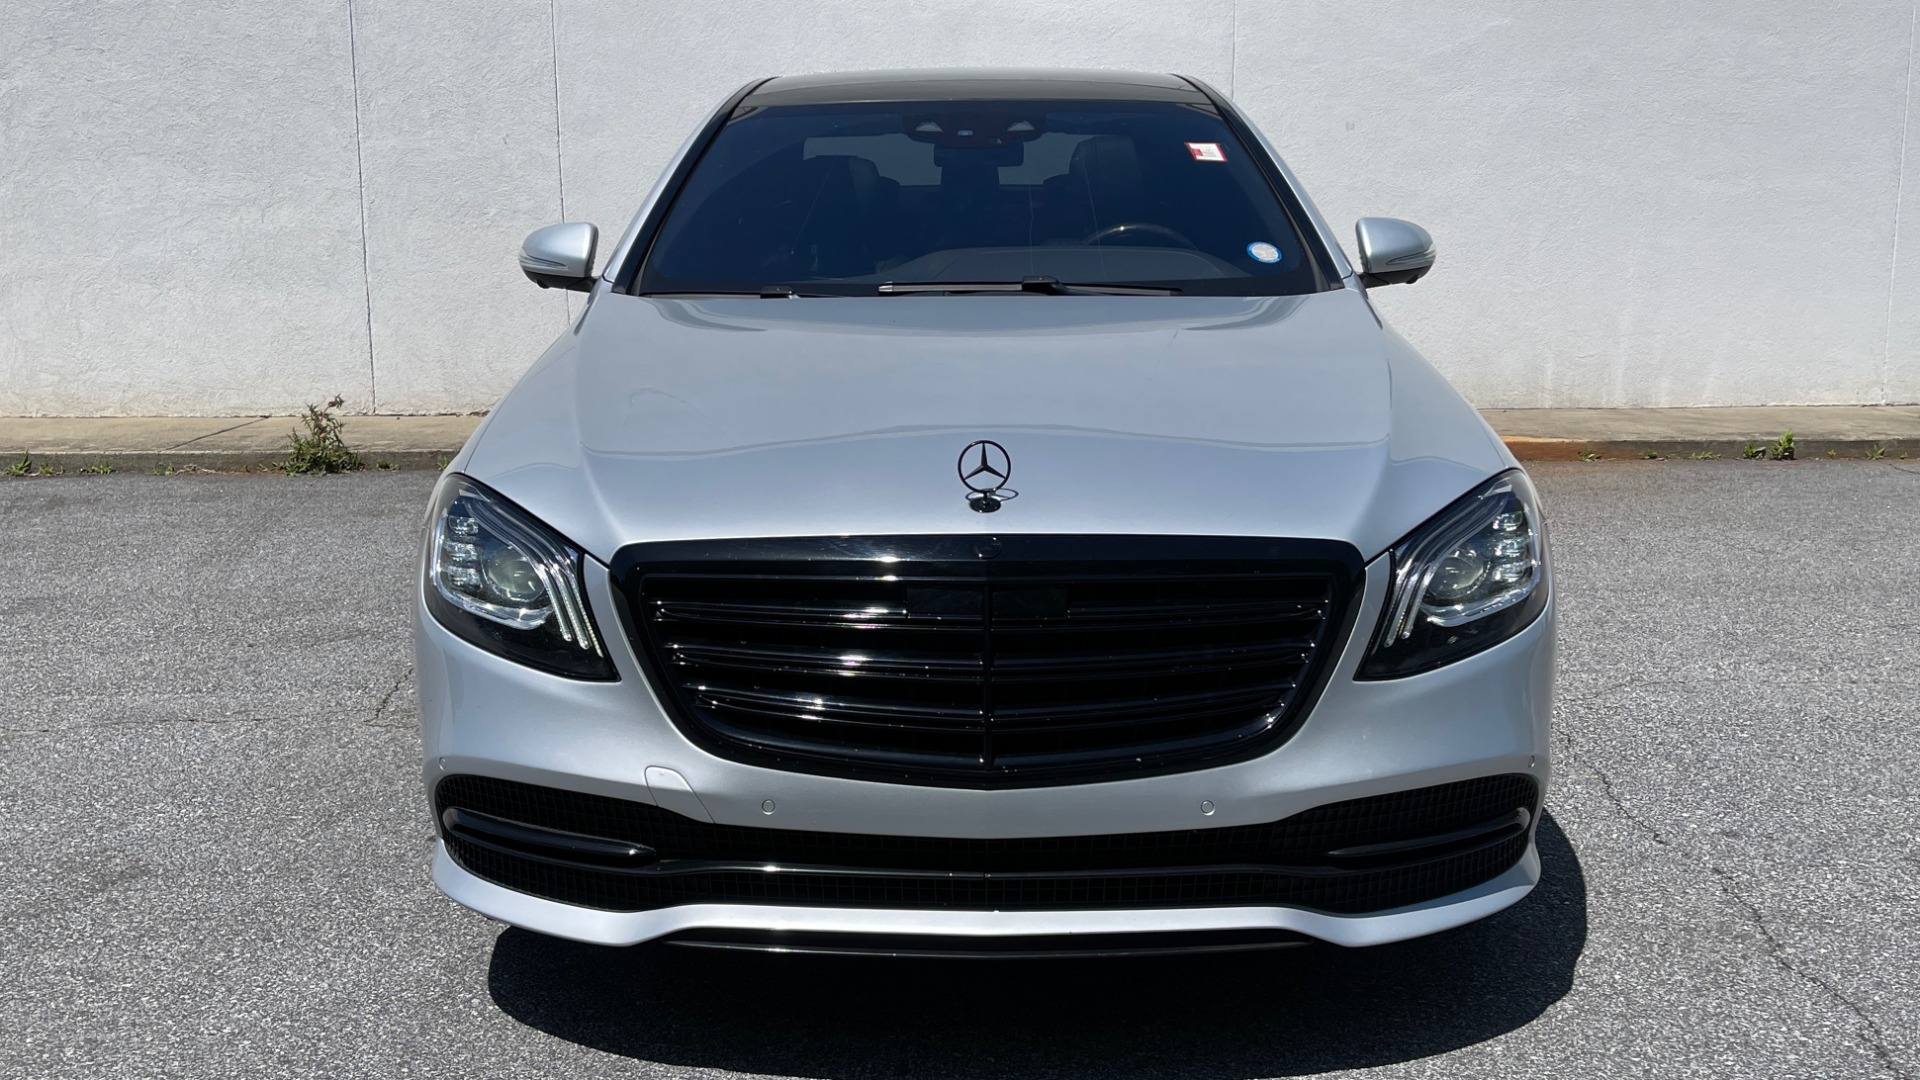 Used 2018 Mercedes-Benz S-CLASS S 450 3.0L SEDAN 362HP / PREMIUM / SUNROOF / SURROUND VIEW for sale $54,995 at Formula Imports in Charlotte NC 28227 9